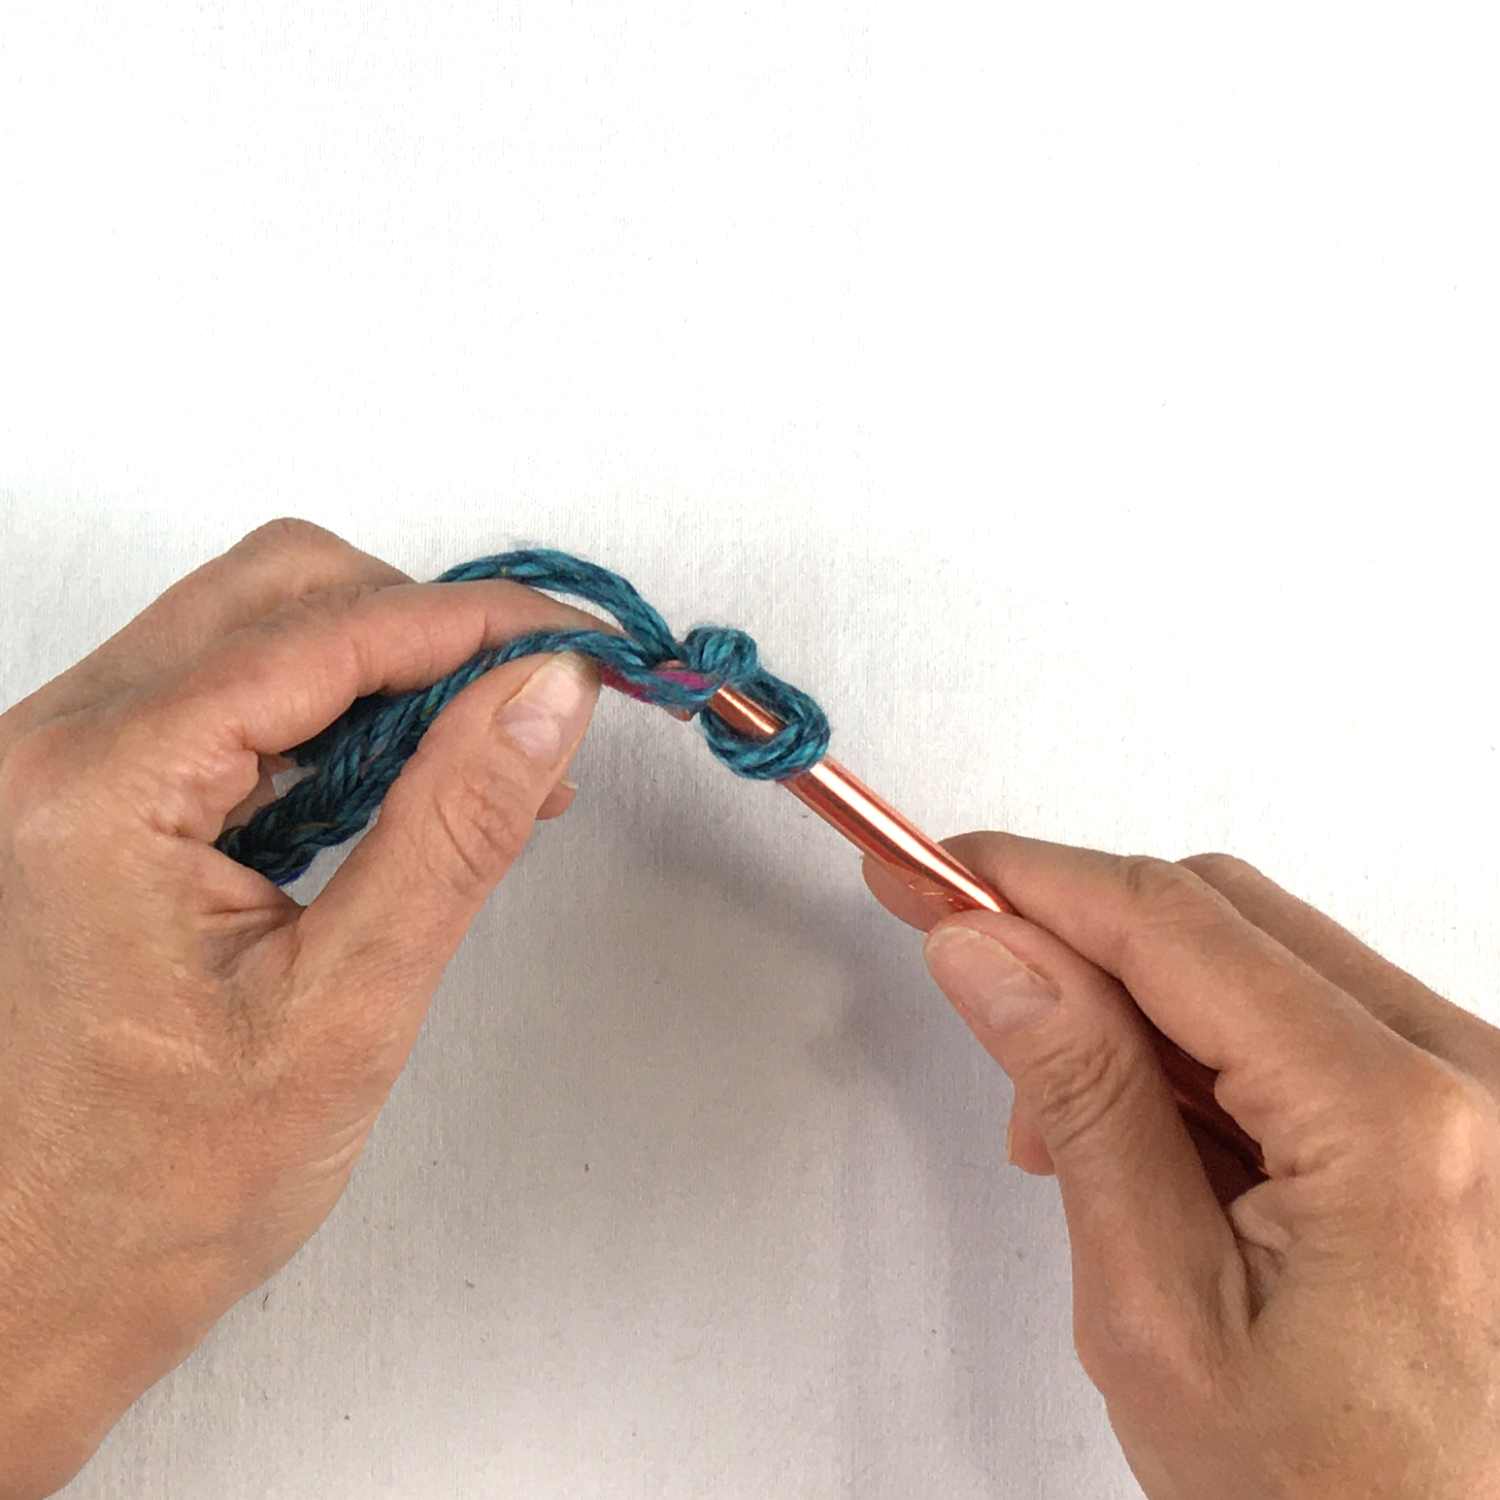 image of hands holding a crochet hook pulling yarn through a loop